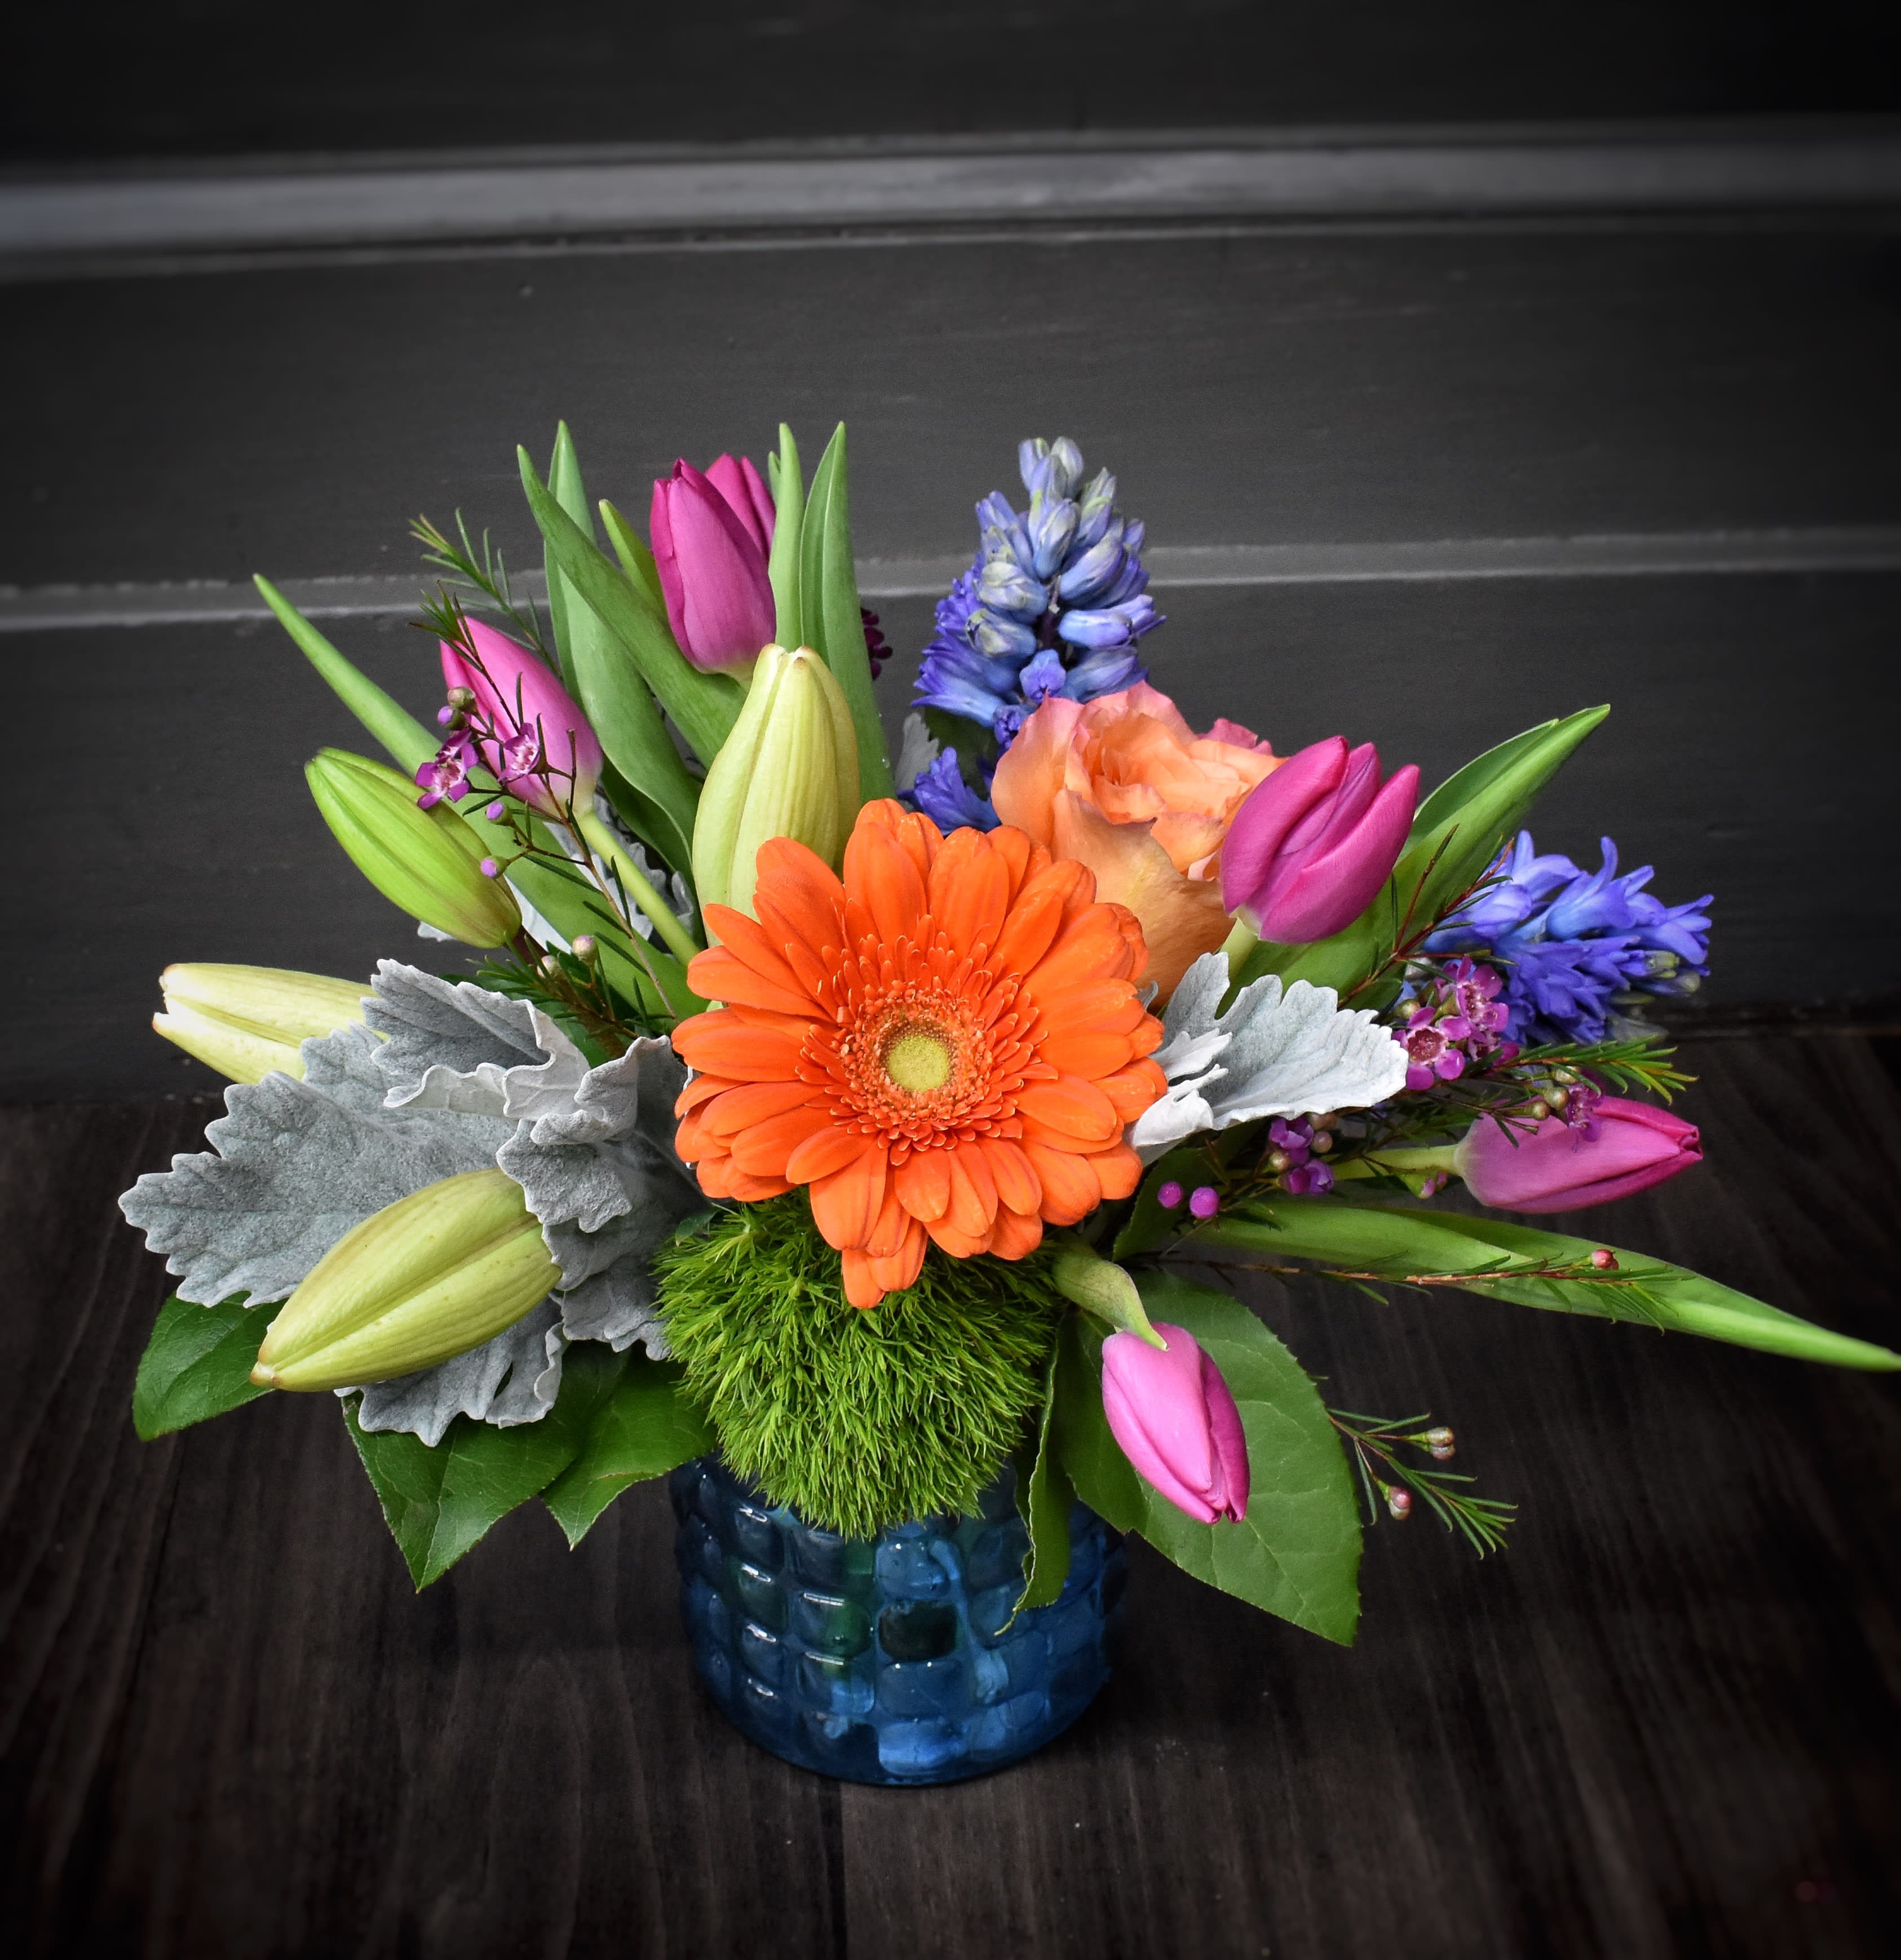 Symphony of Spring - This beautiful blue textured vase is filled with springtime blooms! Fragrant hyacinth, lilies, tulips and more, making a perfect gift.